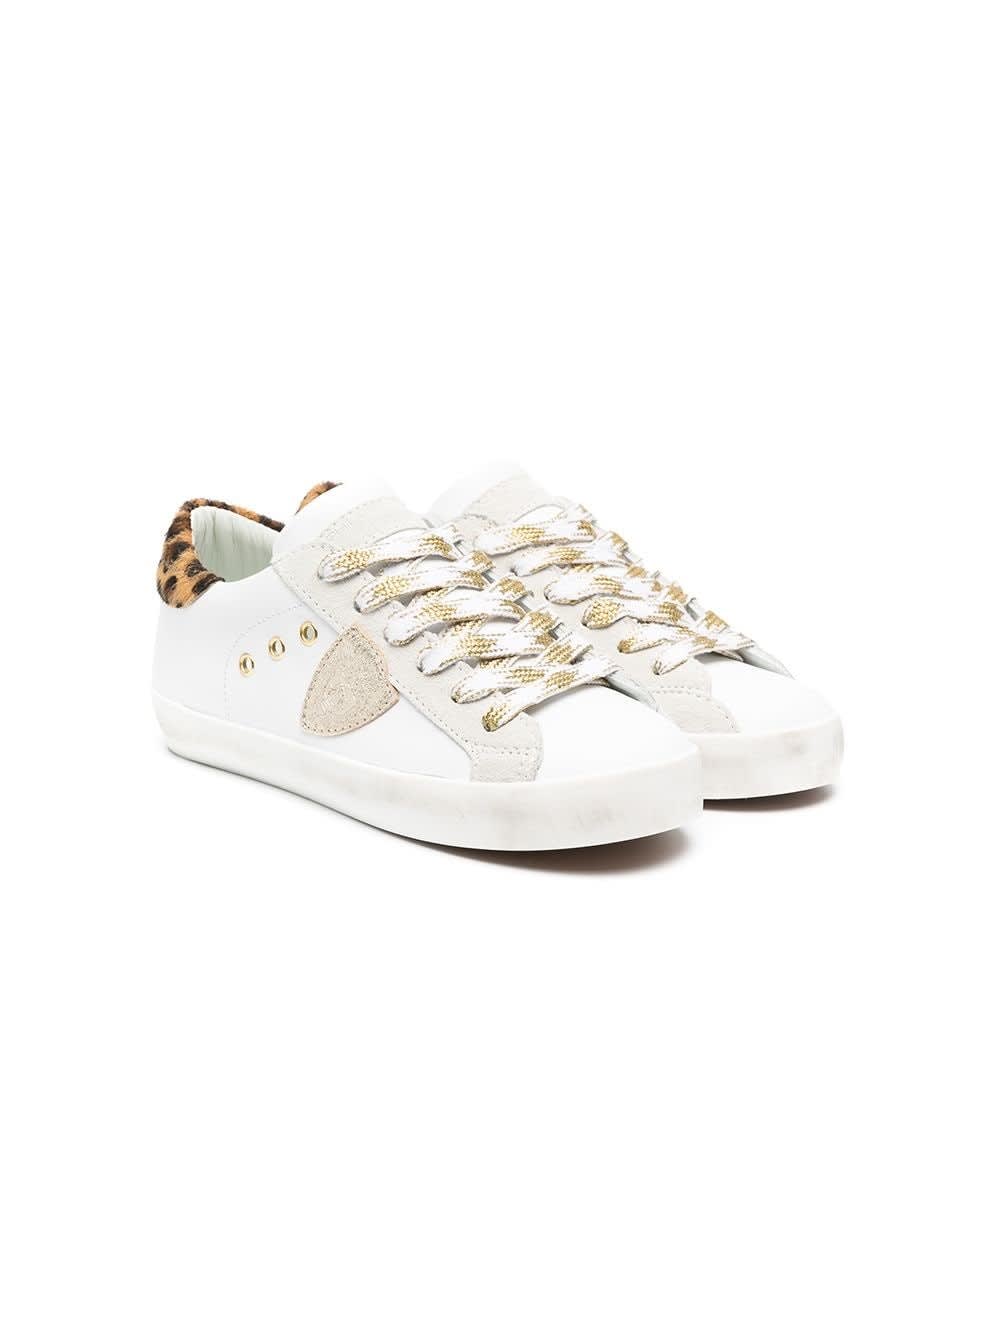 Philippe Model Paris Low Sneaker With Animalier Detail